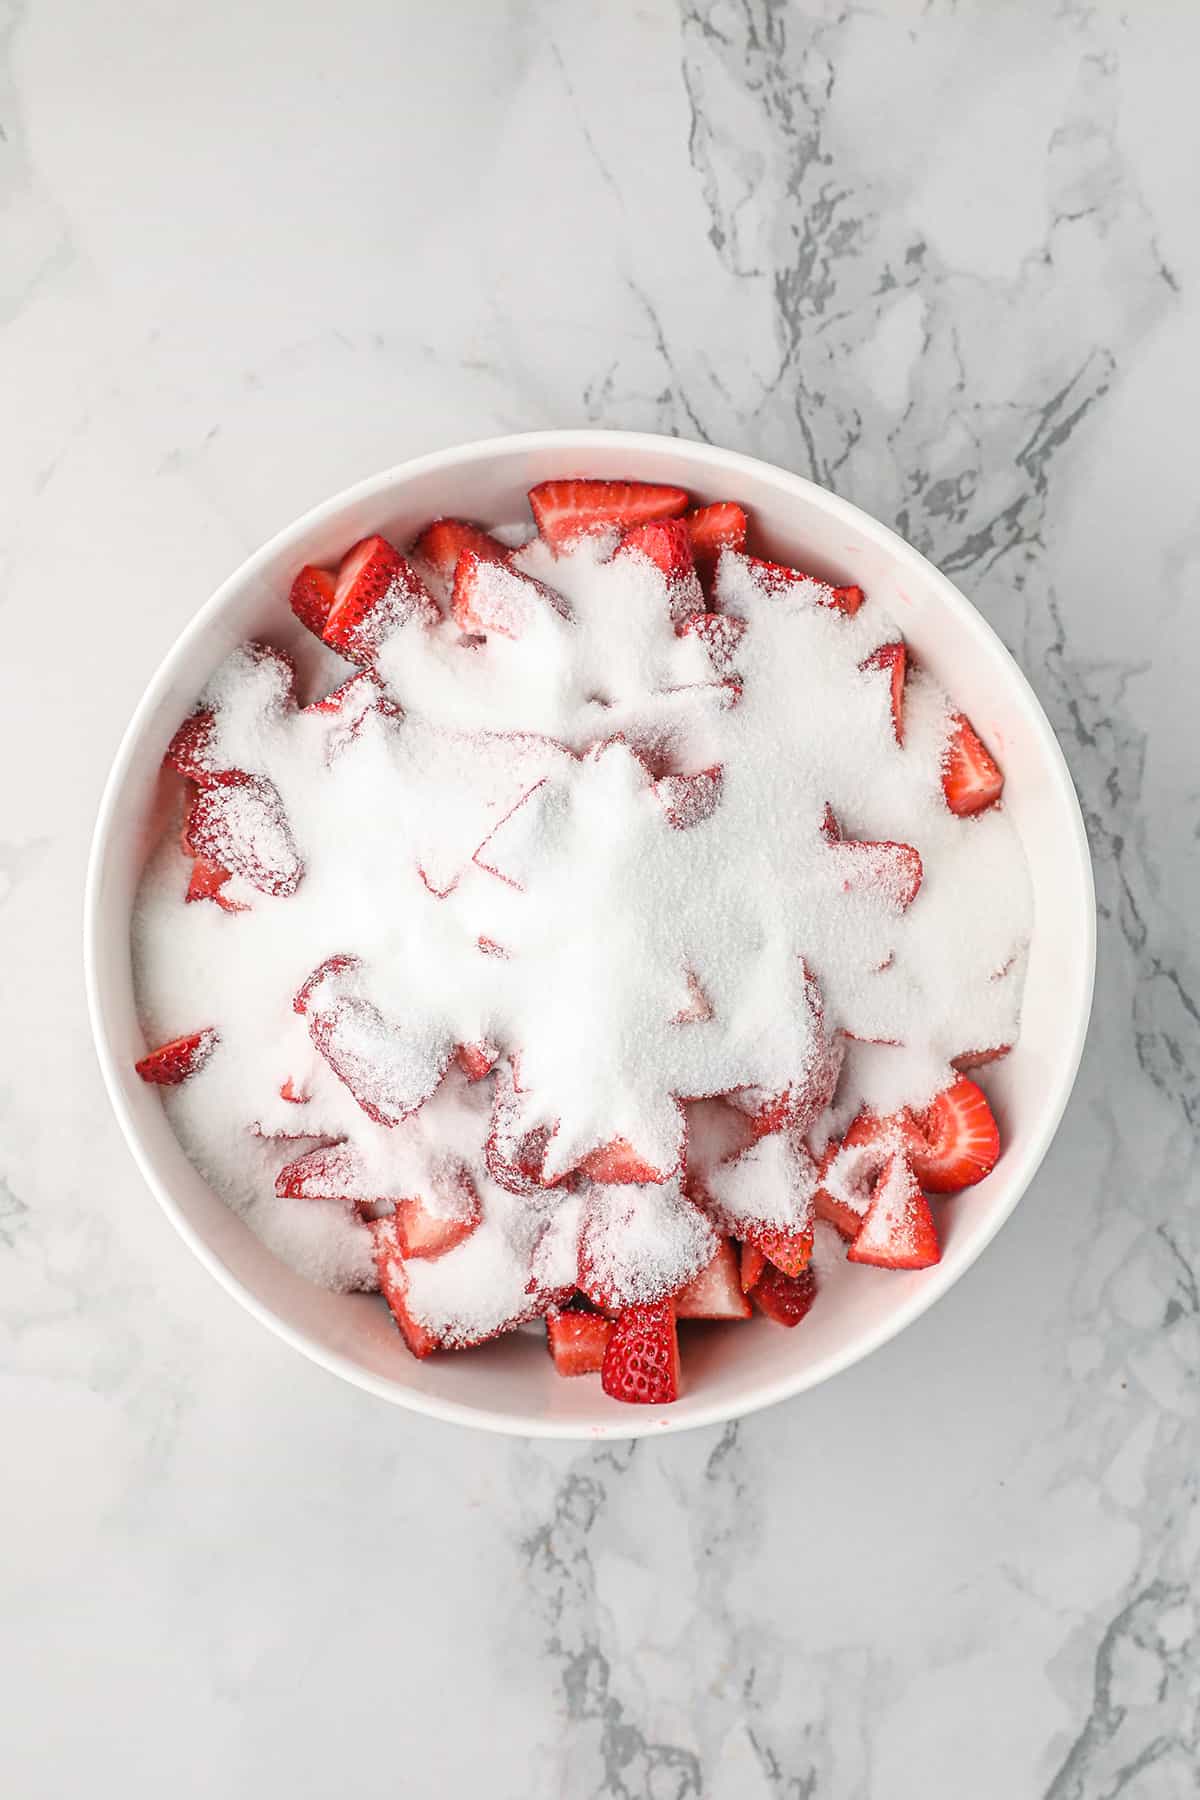 Strawberries and sugar in a bowl.